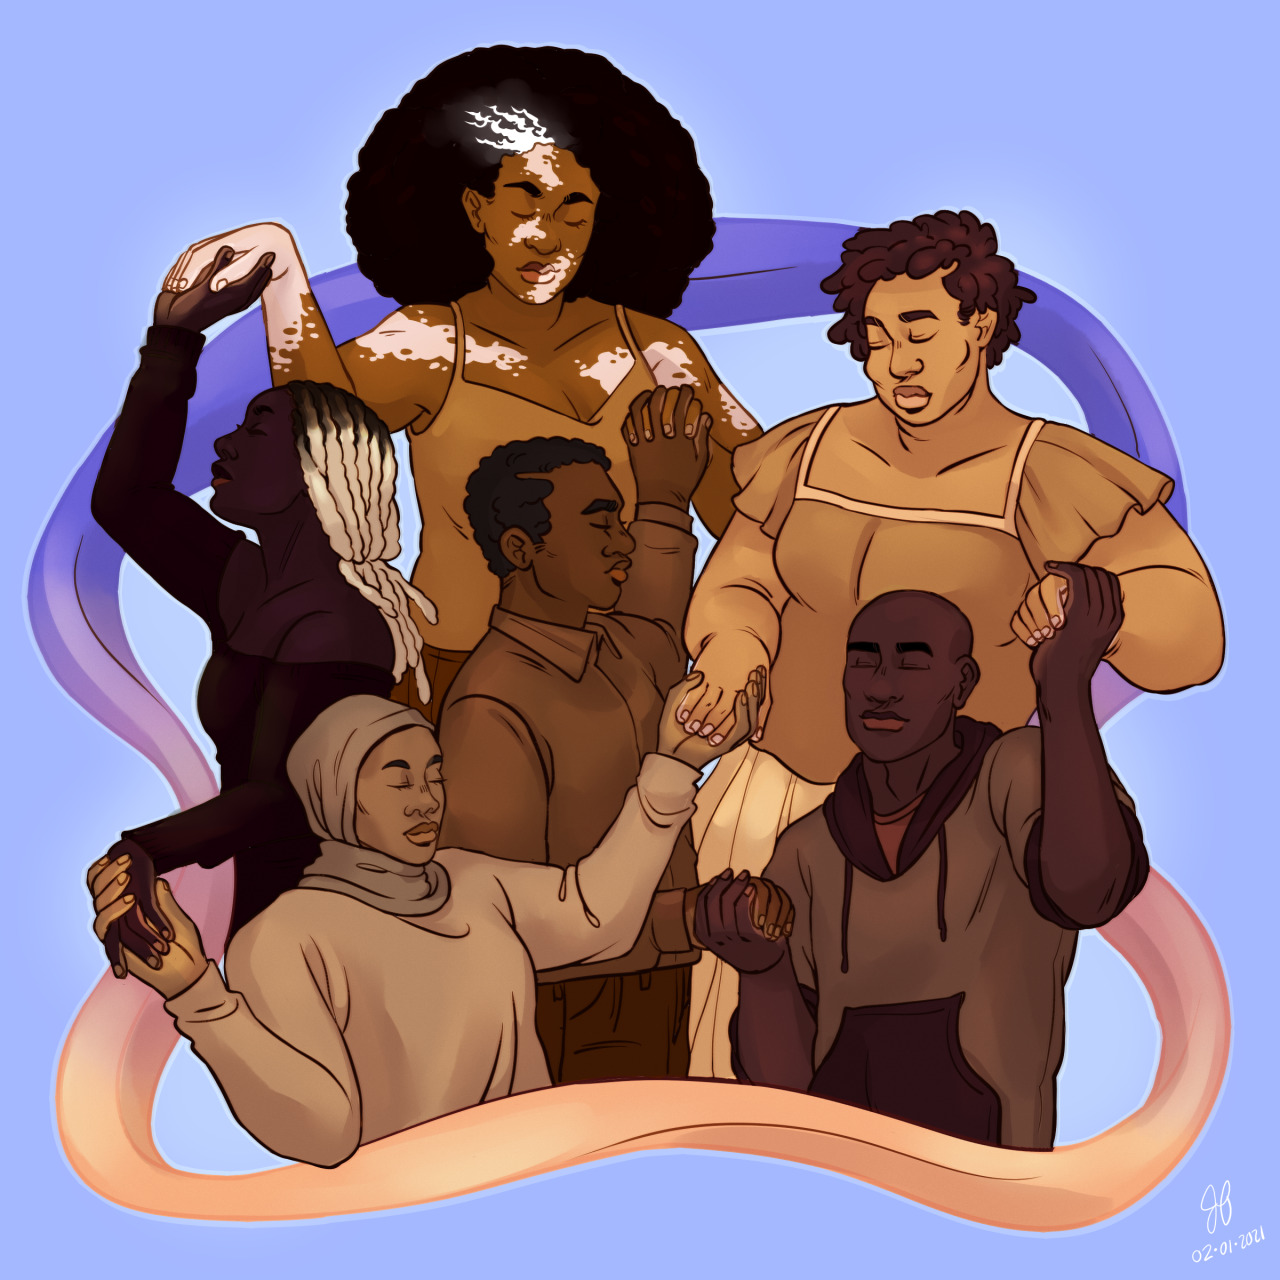 everlastingrandom:
“[ID: Digital art of six Black people of varying body types, hairstyles, outfits, and skin tones. They are gathered together and holding hands in a manner that crosses around them and between them. They all share close-eyed, serene...